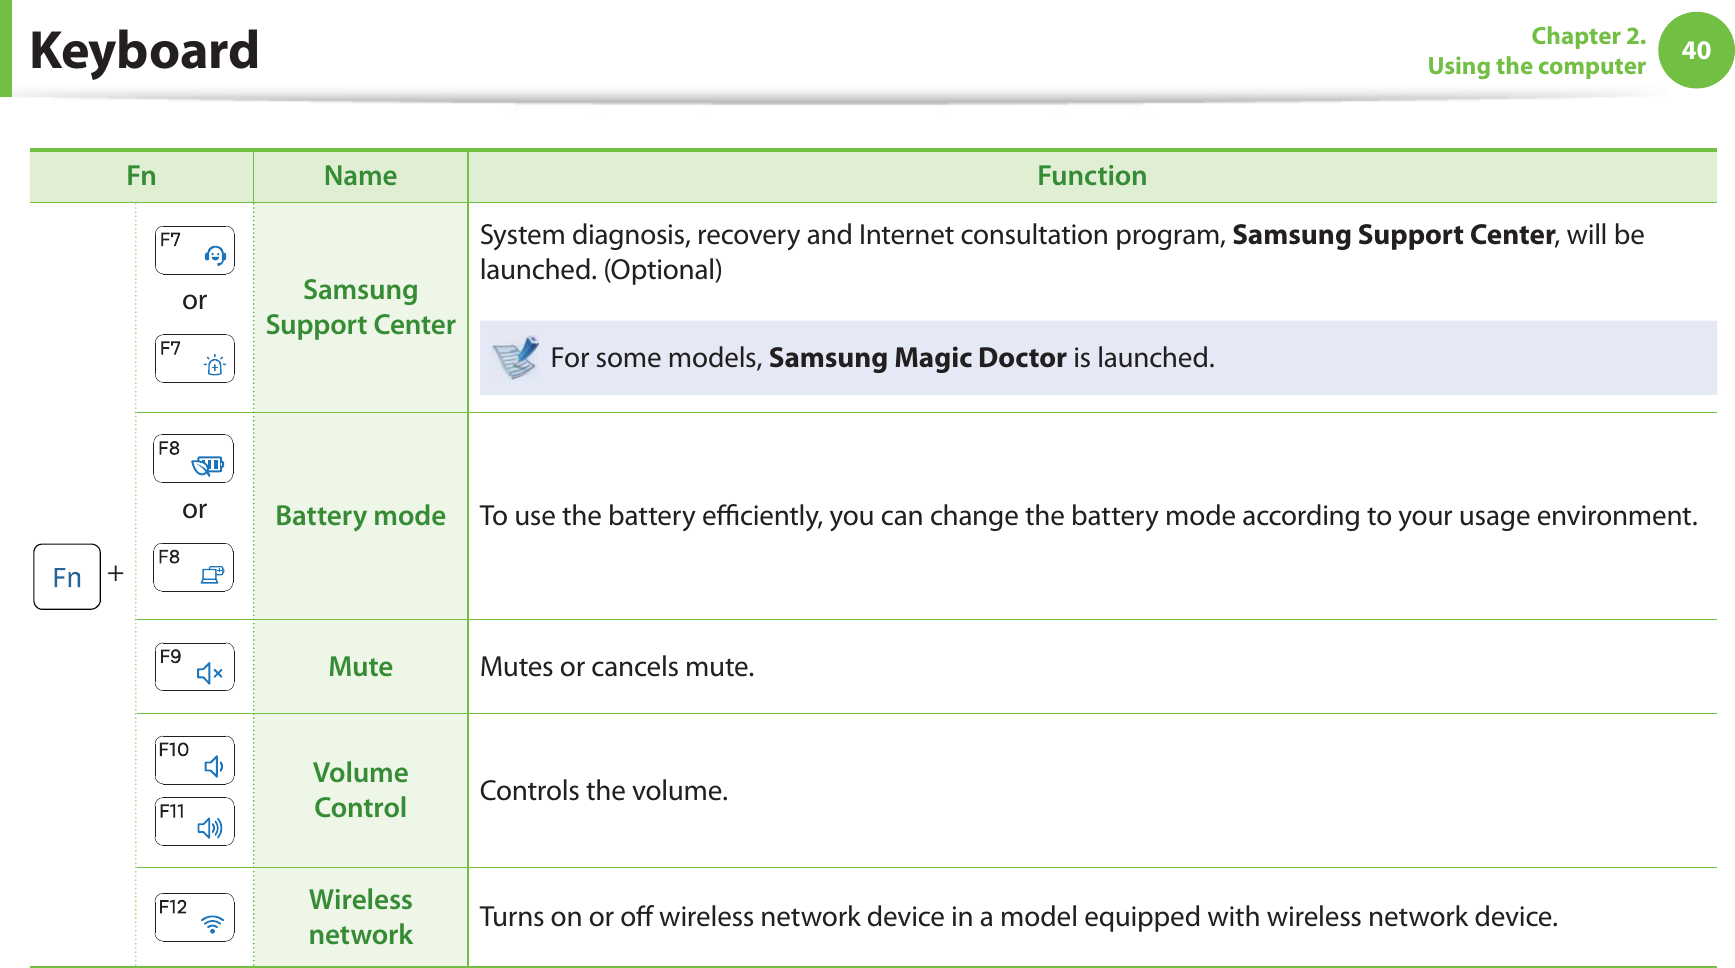 40Chapter 2. Using the computer KeyboardFn Name Function +or  Samsung Support CenterSystem diagnosis, recovery and Internet consultation program, Samsung Support Center, will be launched. (Optional) For some models, Samsung Magic Doctor is launched.or  Battery mode To use the battery eﬃ  ciently, you can change the battery mode according to your usage environment.Mute Mutes or cancels mute.Volume Control Controls the volume. Wireless network Turns on or oﬀ  wireless network device in a model equipped with wireless network device. 